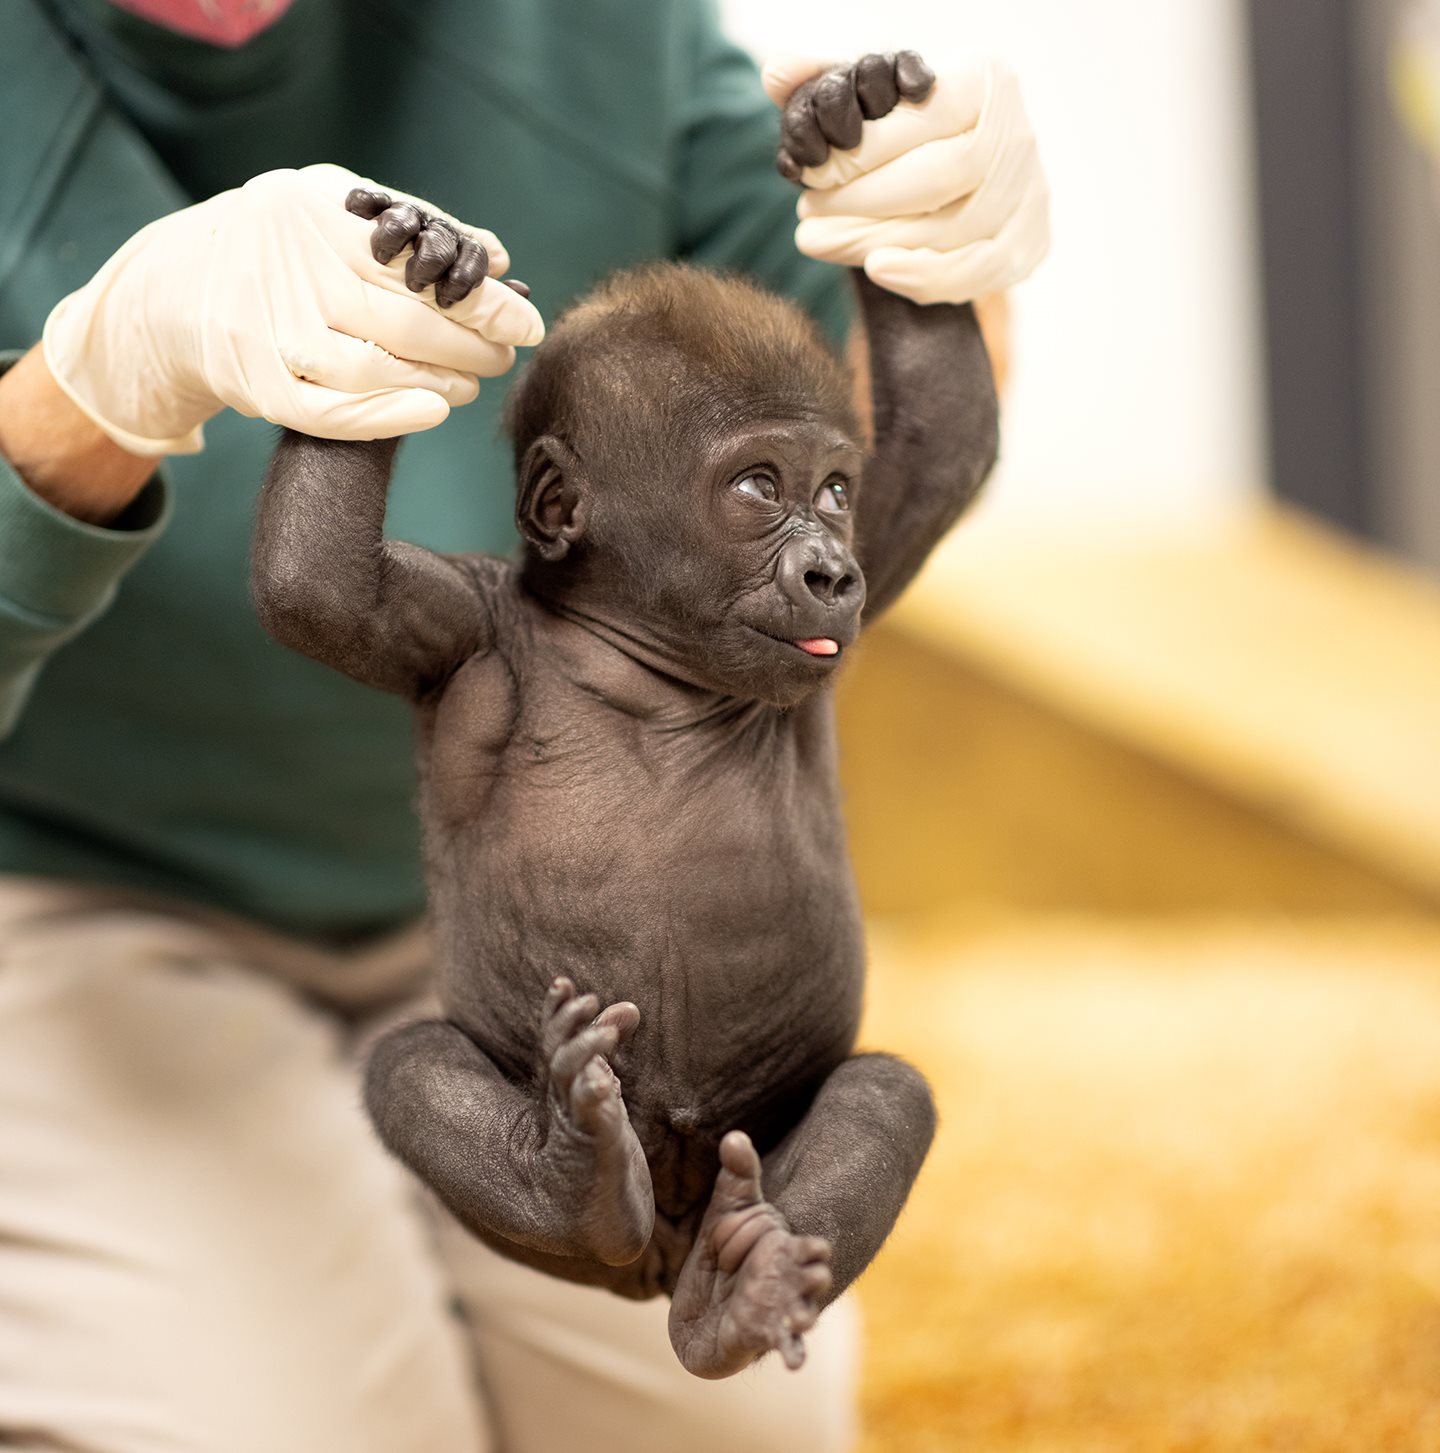 Cleveland Metroparks Zoo to Foster 11-week-old Gorilla from Fort Worth Zoo 